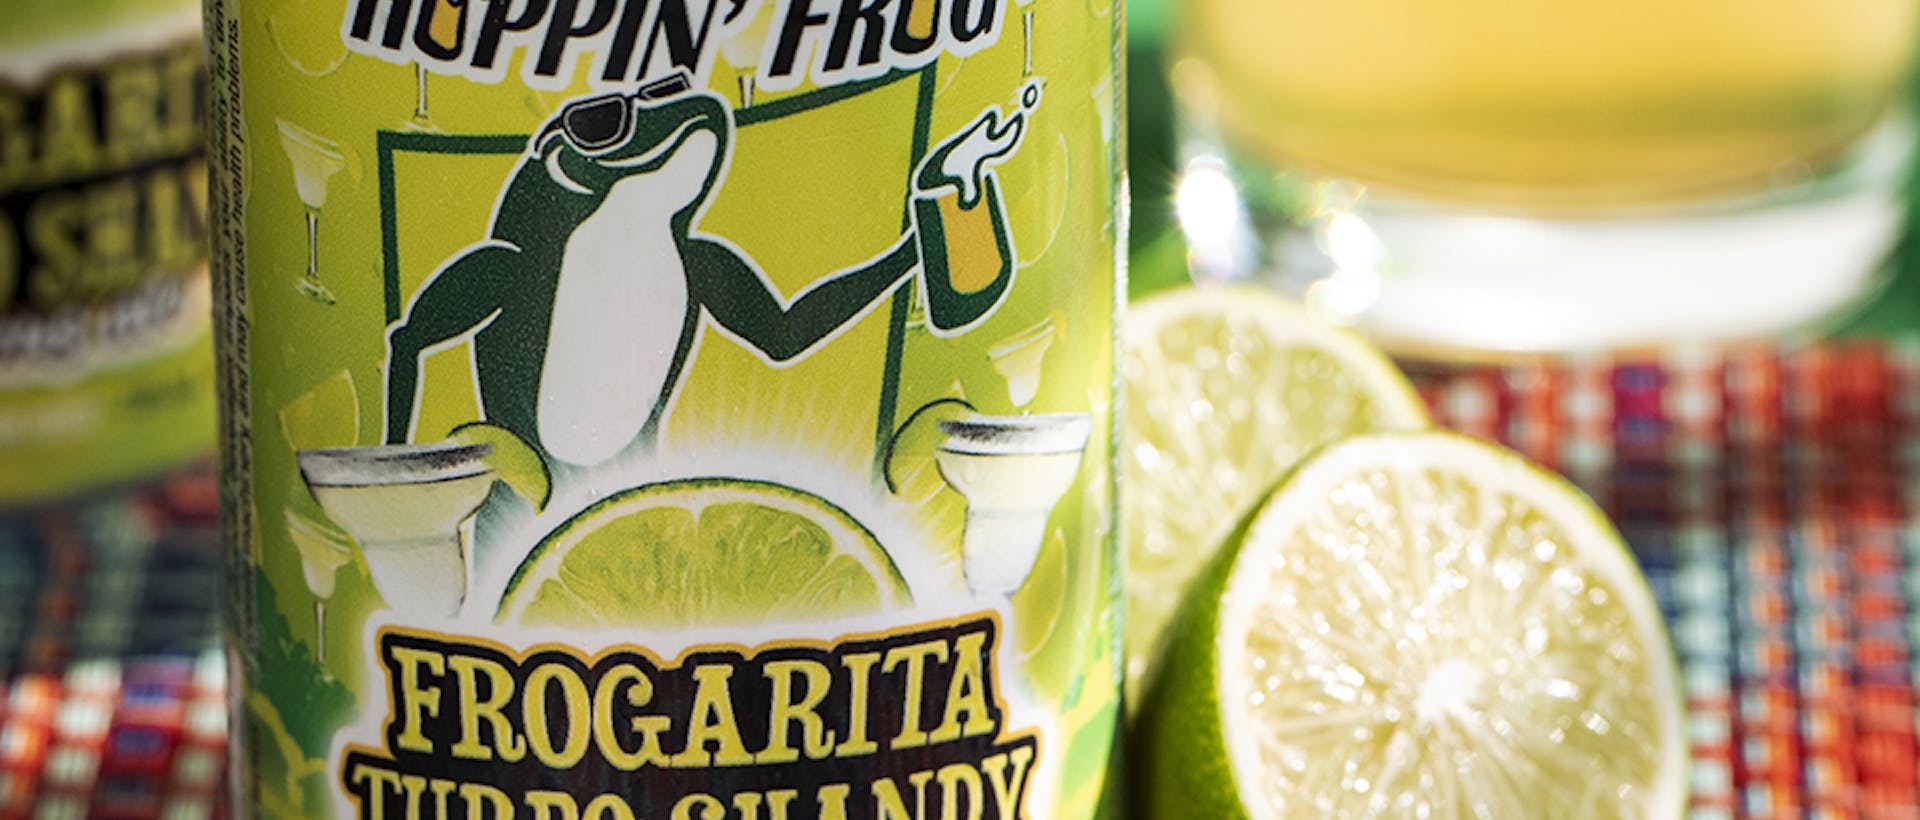 Frogarita turbo shandy beer with lime